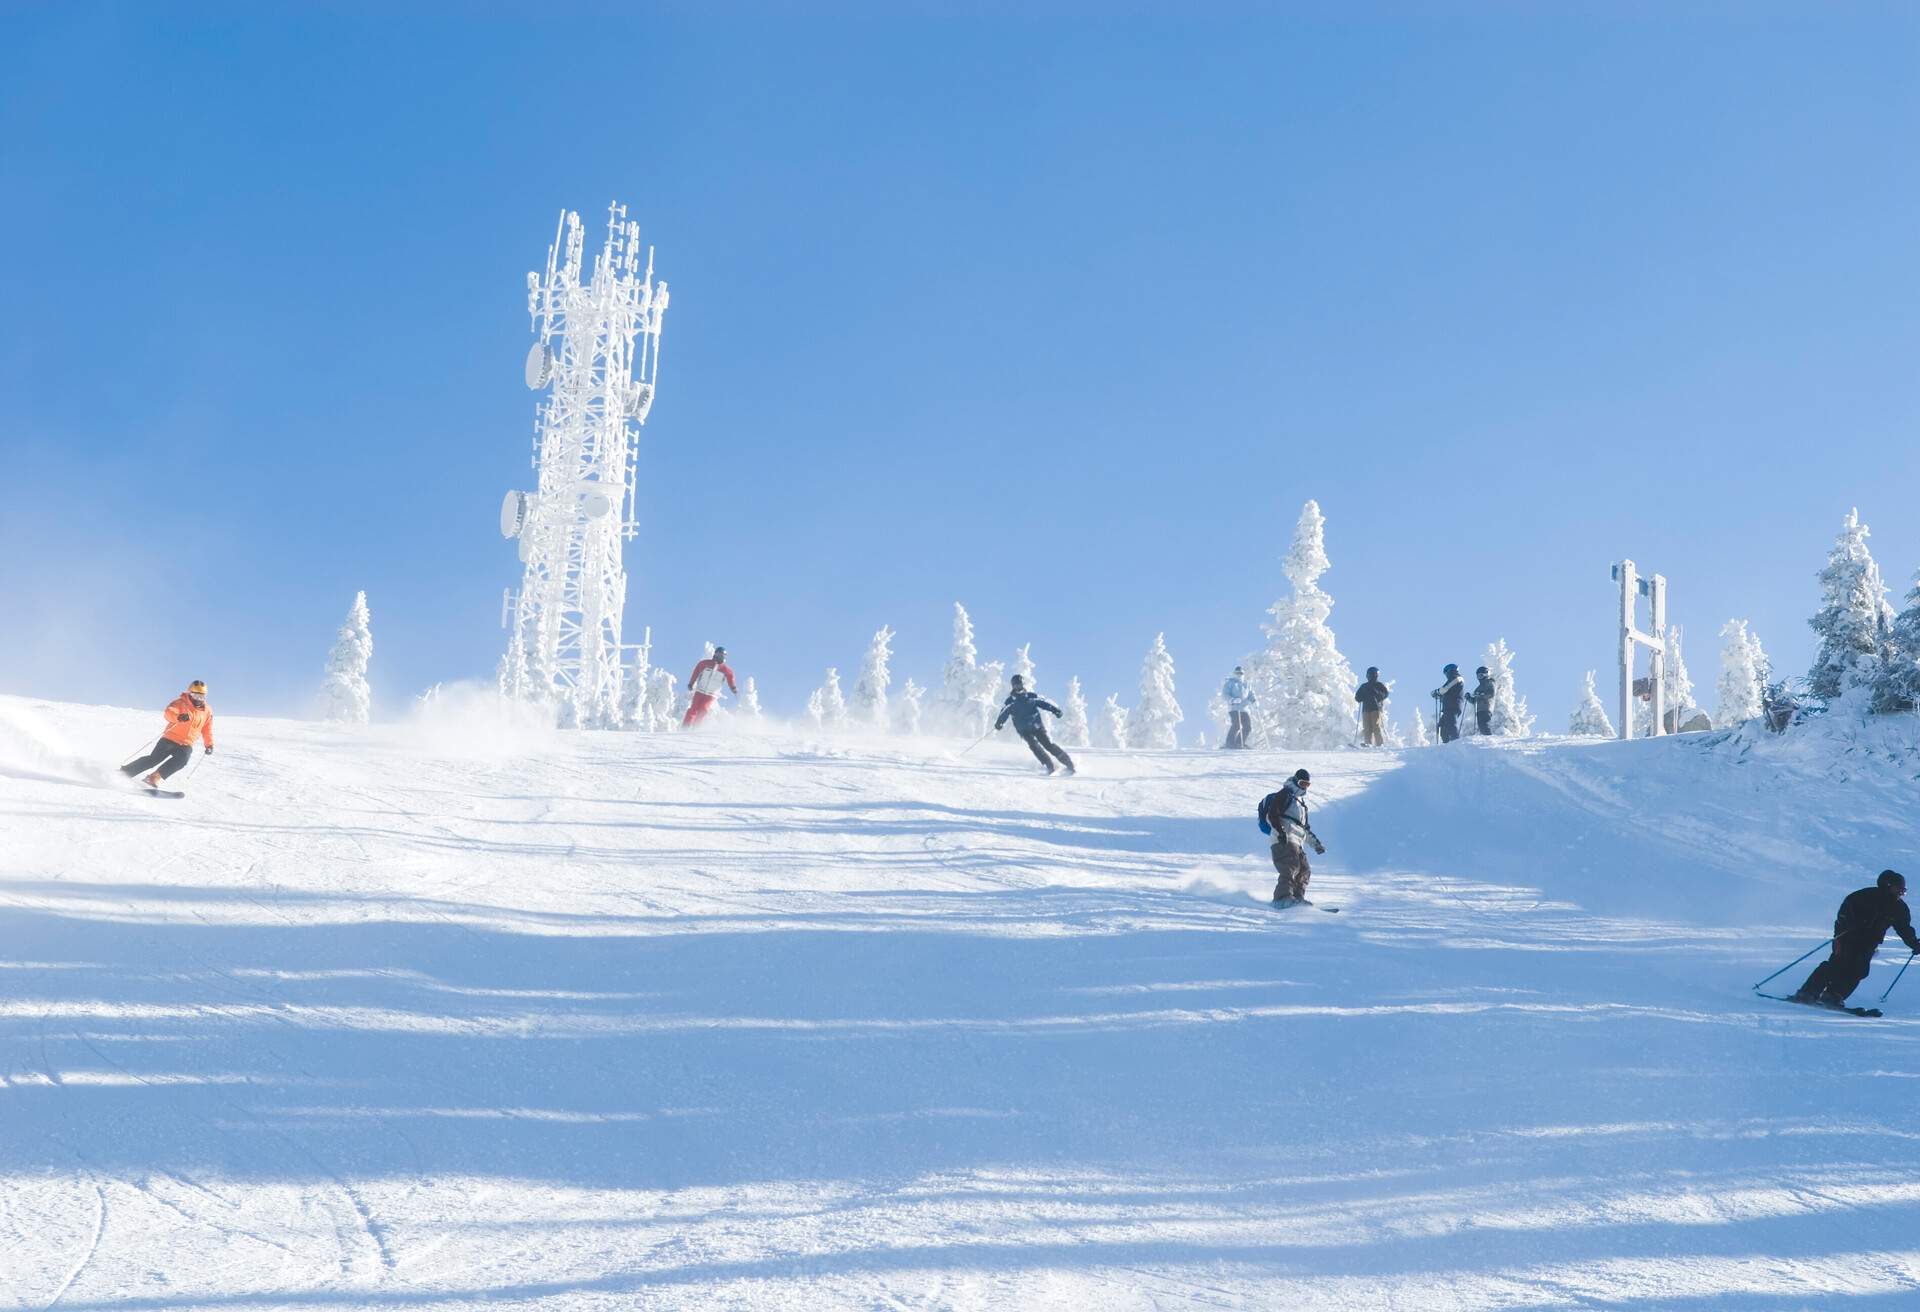 Winter scenery at the ski hill - Laurentian Mountains, Quebec, Canada.